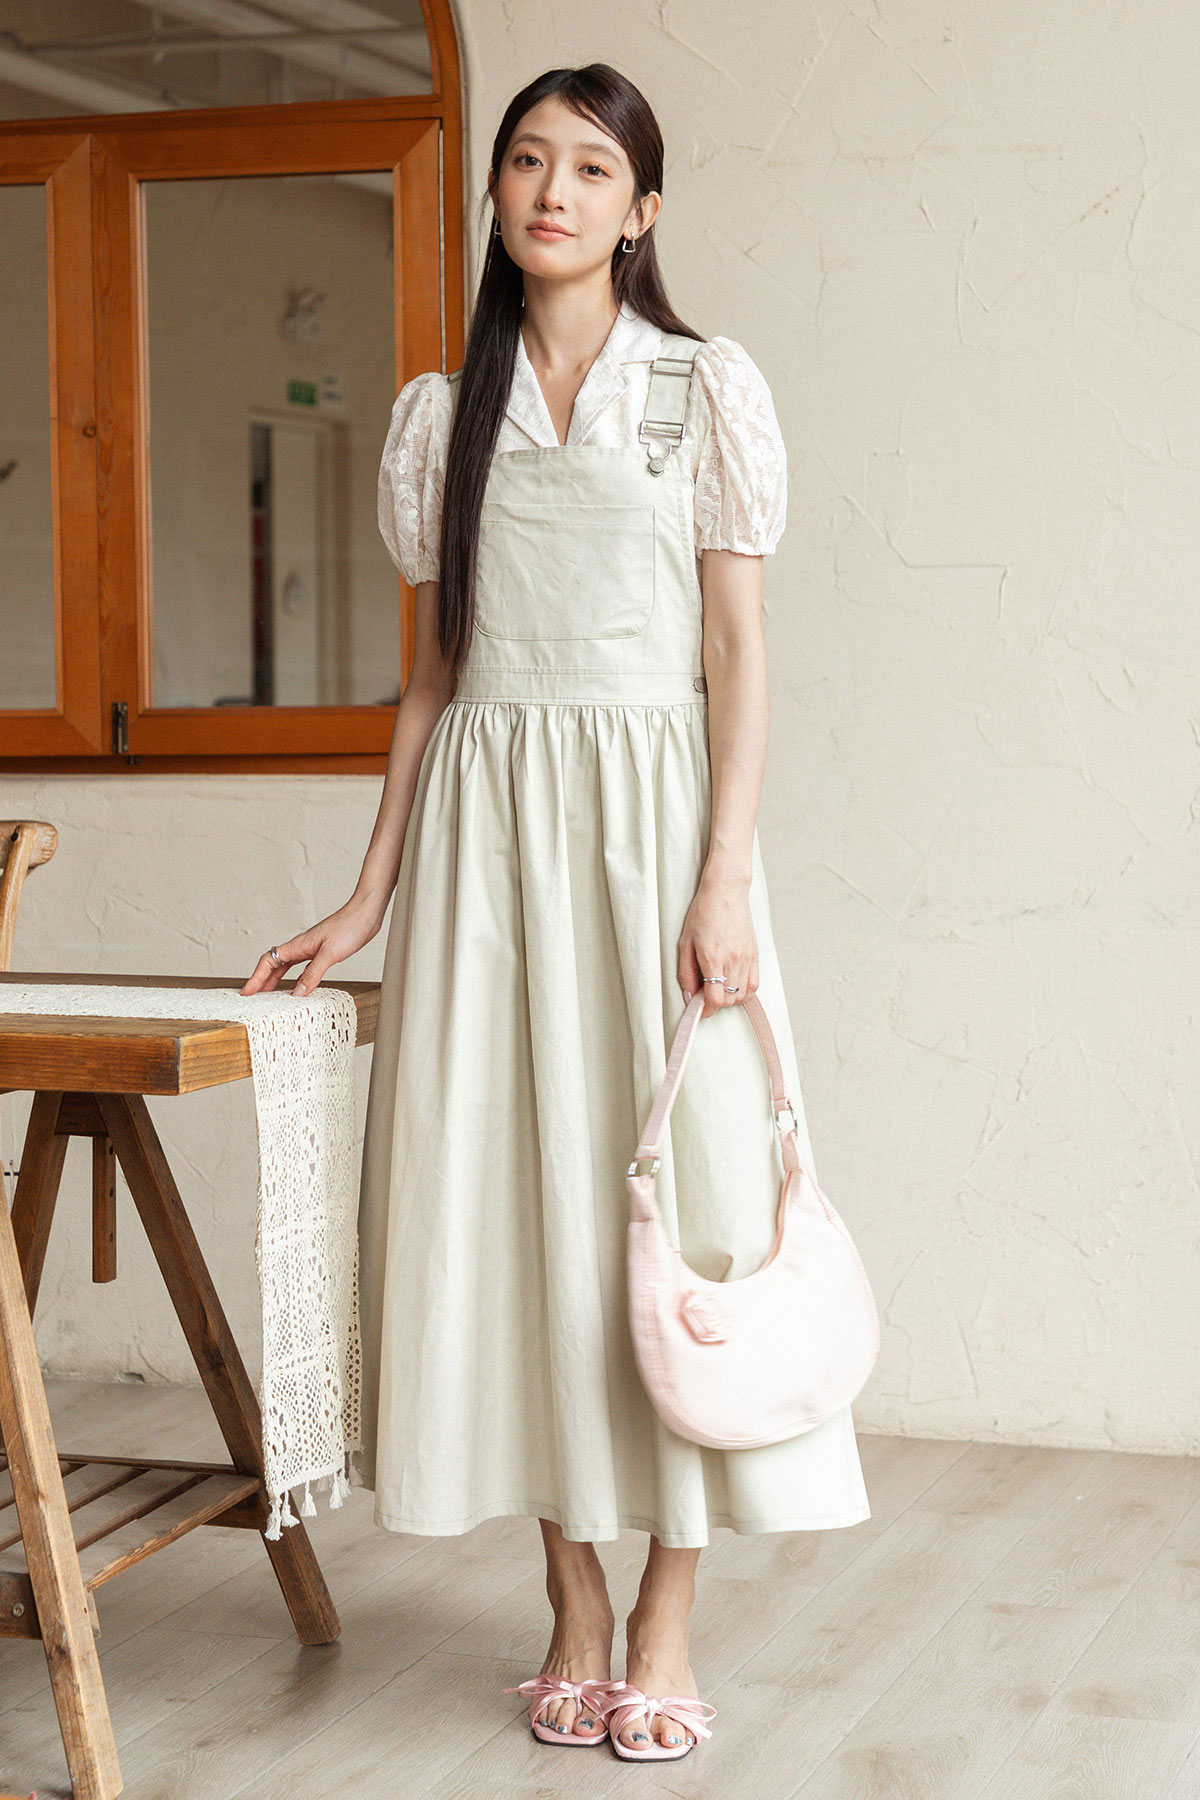 JANIVER DUNGAREE DRESS - SANDSTONE [BY MODPARADE]